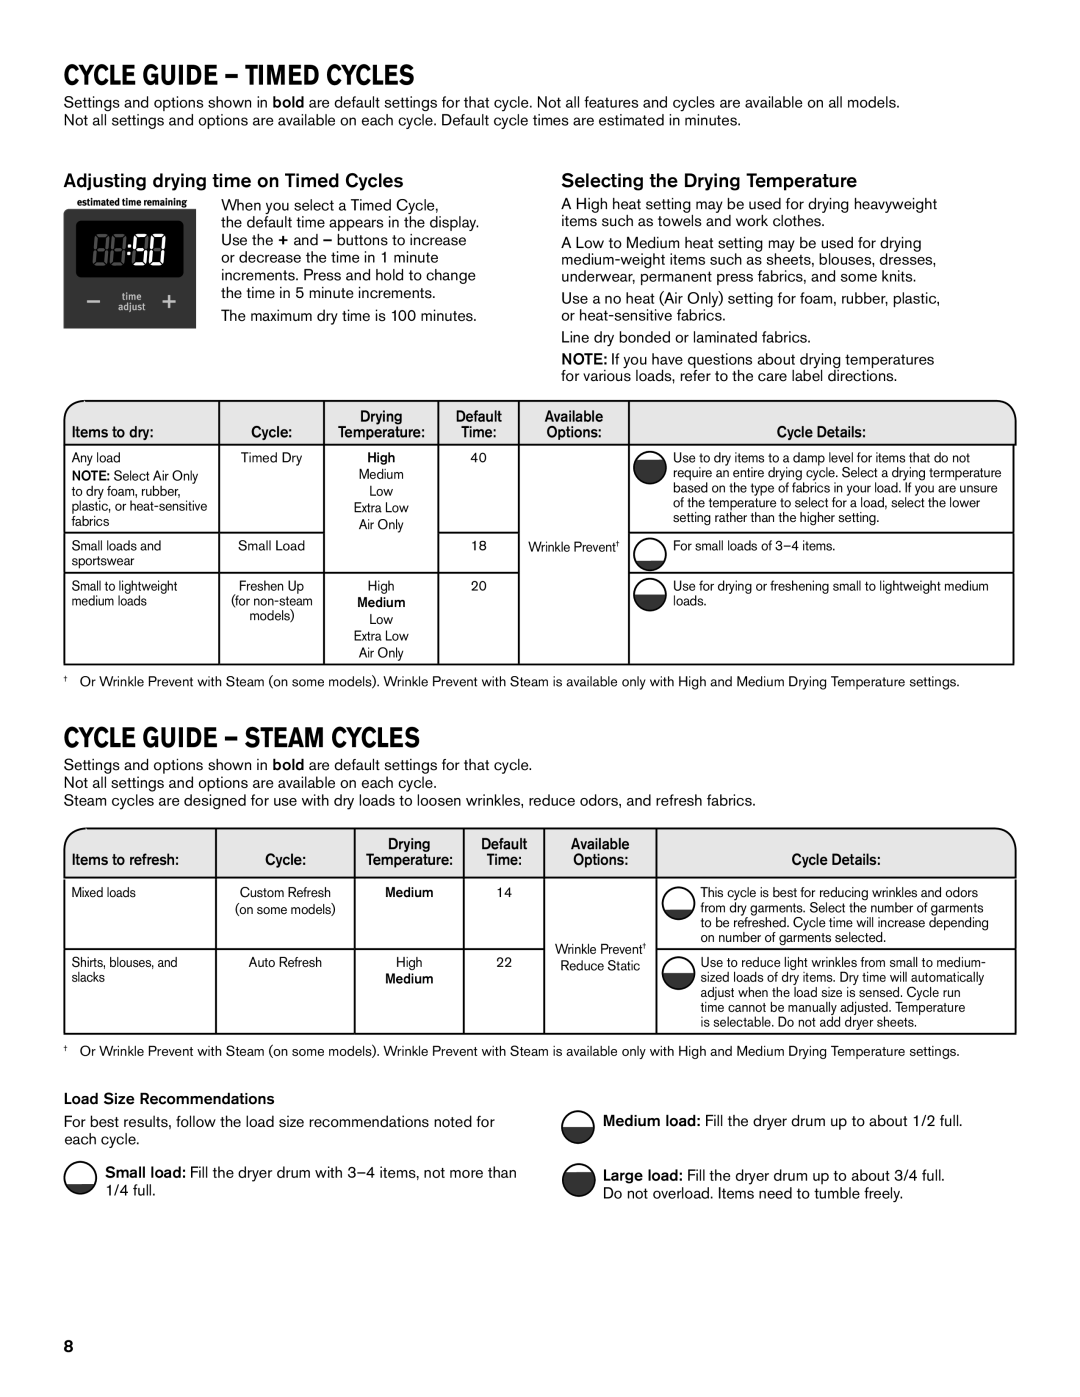 Maytag W105623338C-SP Cycle Guide - Timed Cycles, Cycle Guide - Steam Cycles, Adjusting drying time on Timed Cycles 